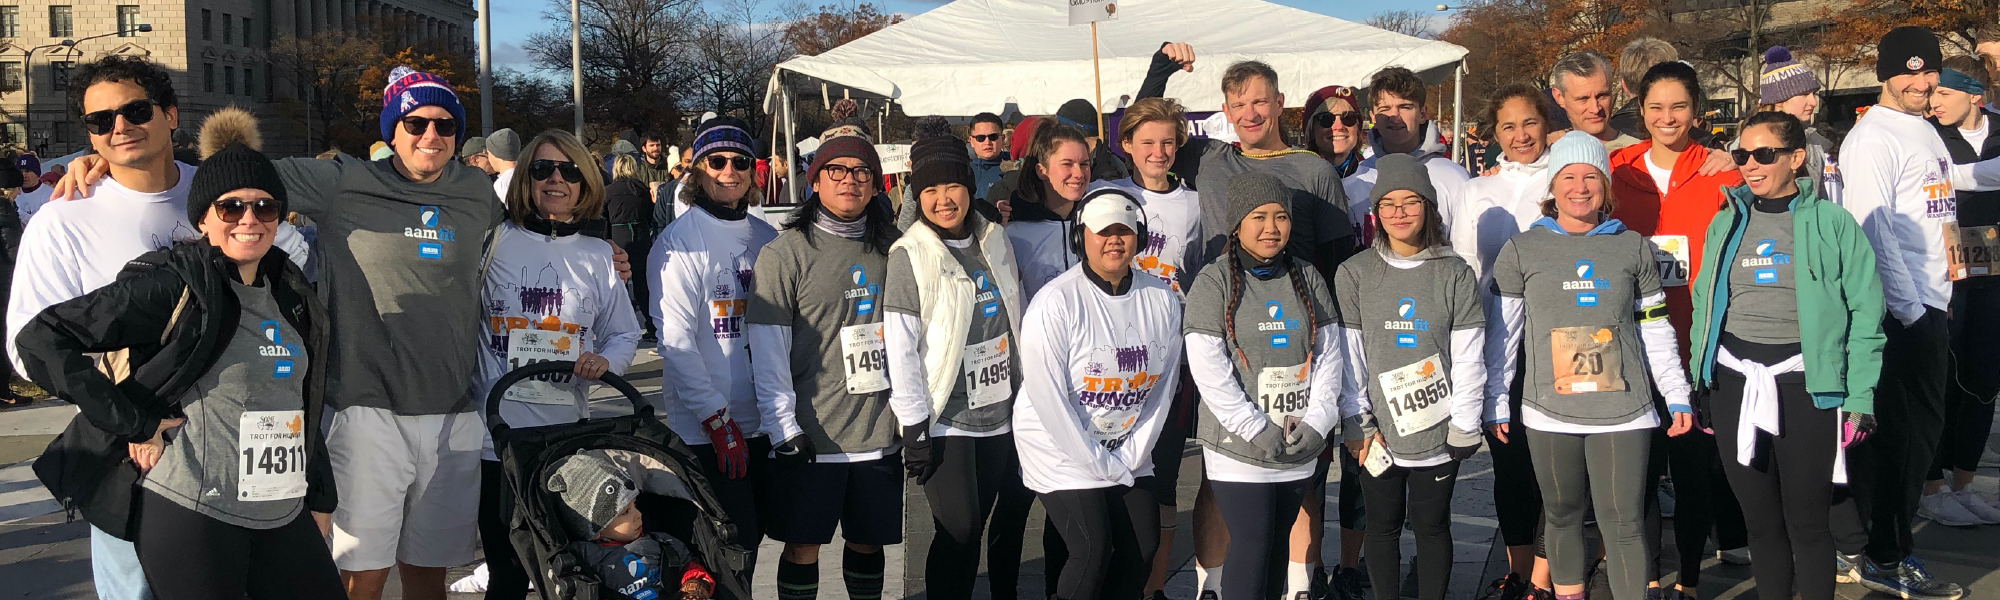 AAM employees and family members joined more than 2,000 walkers and runners at Freedom Plaza on Thanksgiving for the So Others Might Eat (SOME) annual Trot for Hunger.